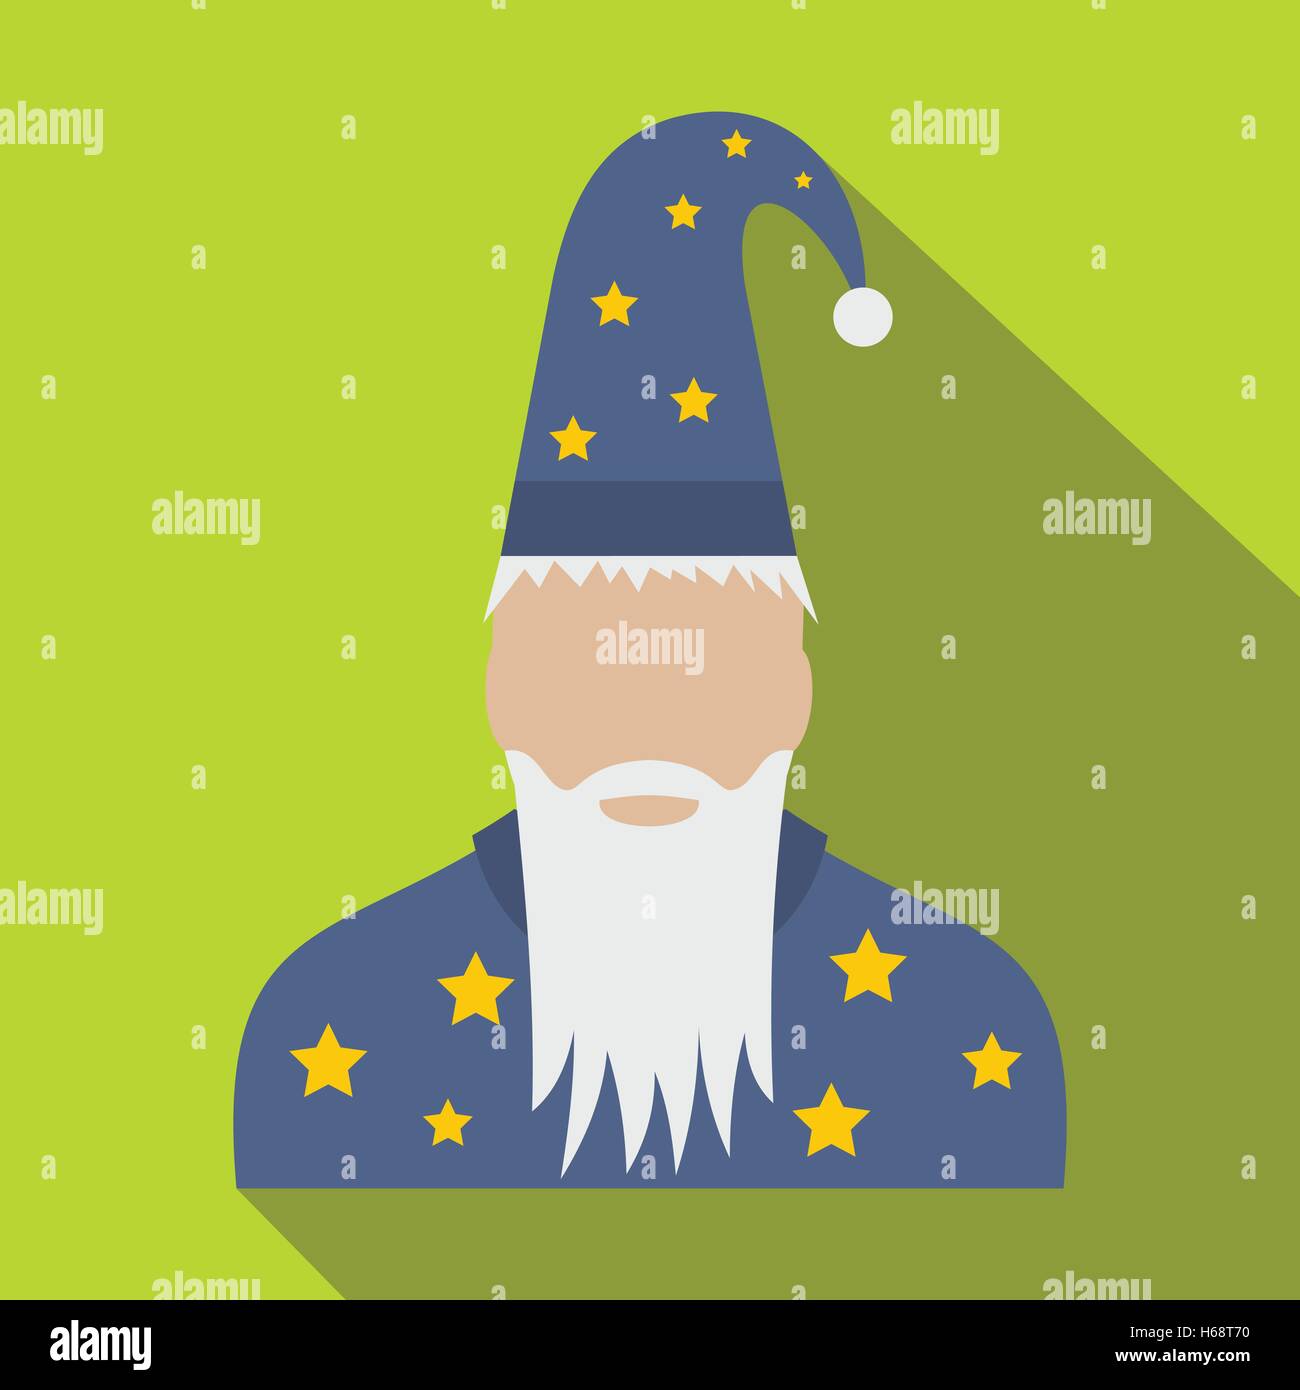 Wizard in a hat with stars flat Stock Vector